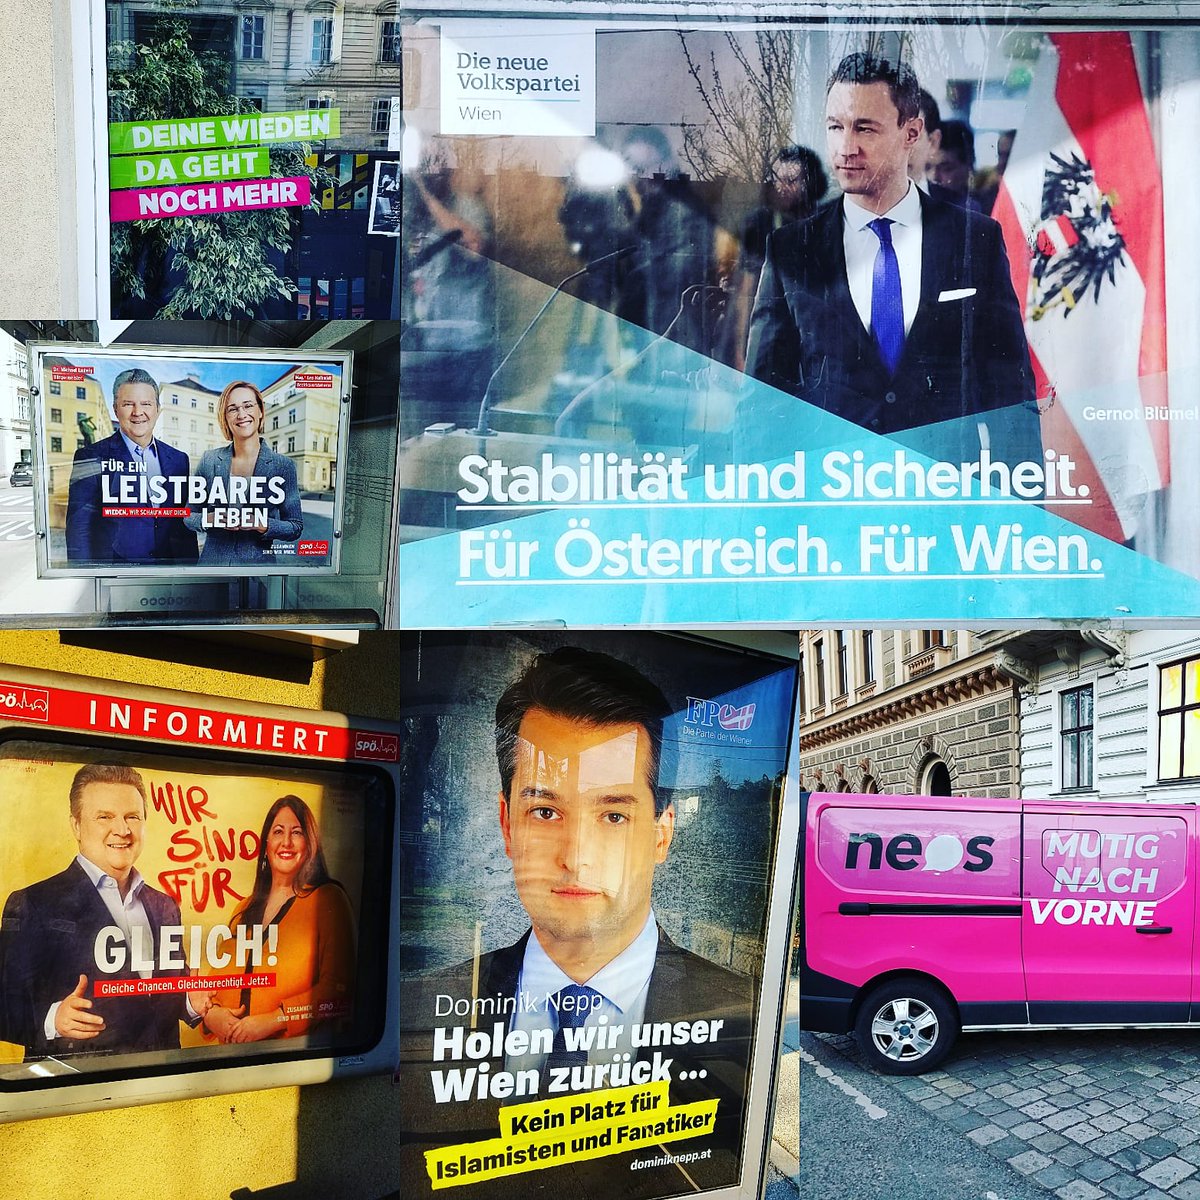 A 📸 for #CPE #ComparativePolitics 
US 'particularistic' parties with generic campaign message of Hope, Change, MAGA v. European 'programmatic' parties with clear stances on policy issues 

Took these on my Covid19 walks around Vienna. Feel free to share image with your classes